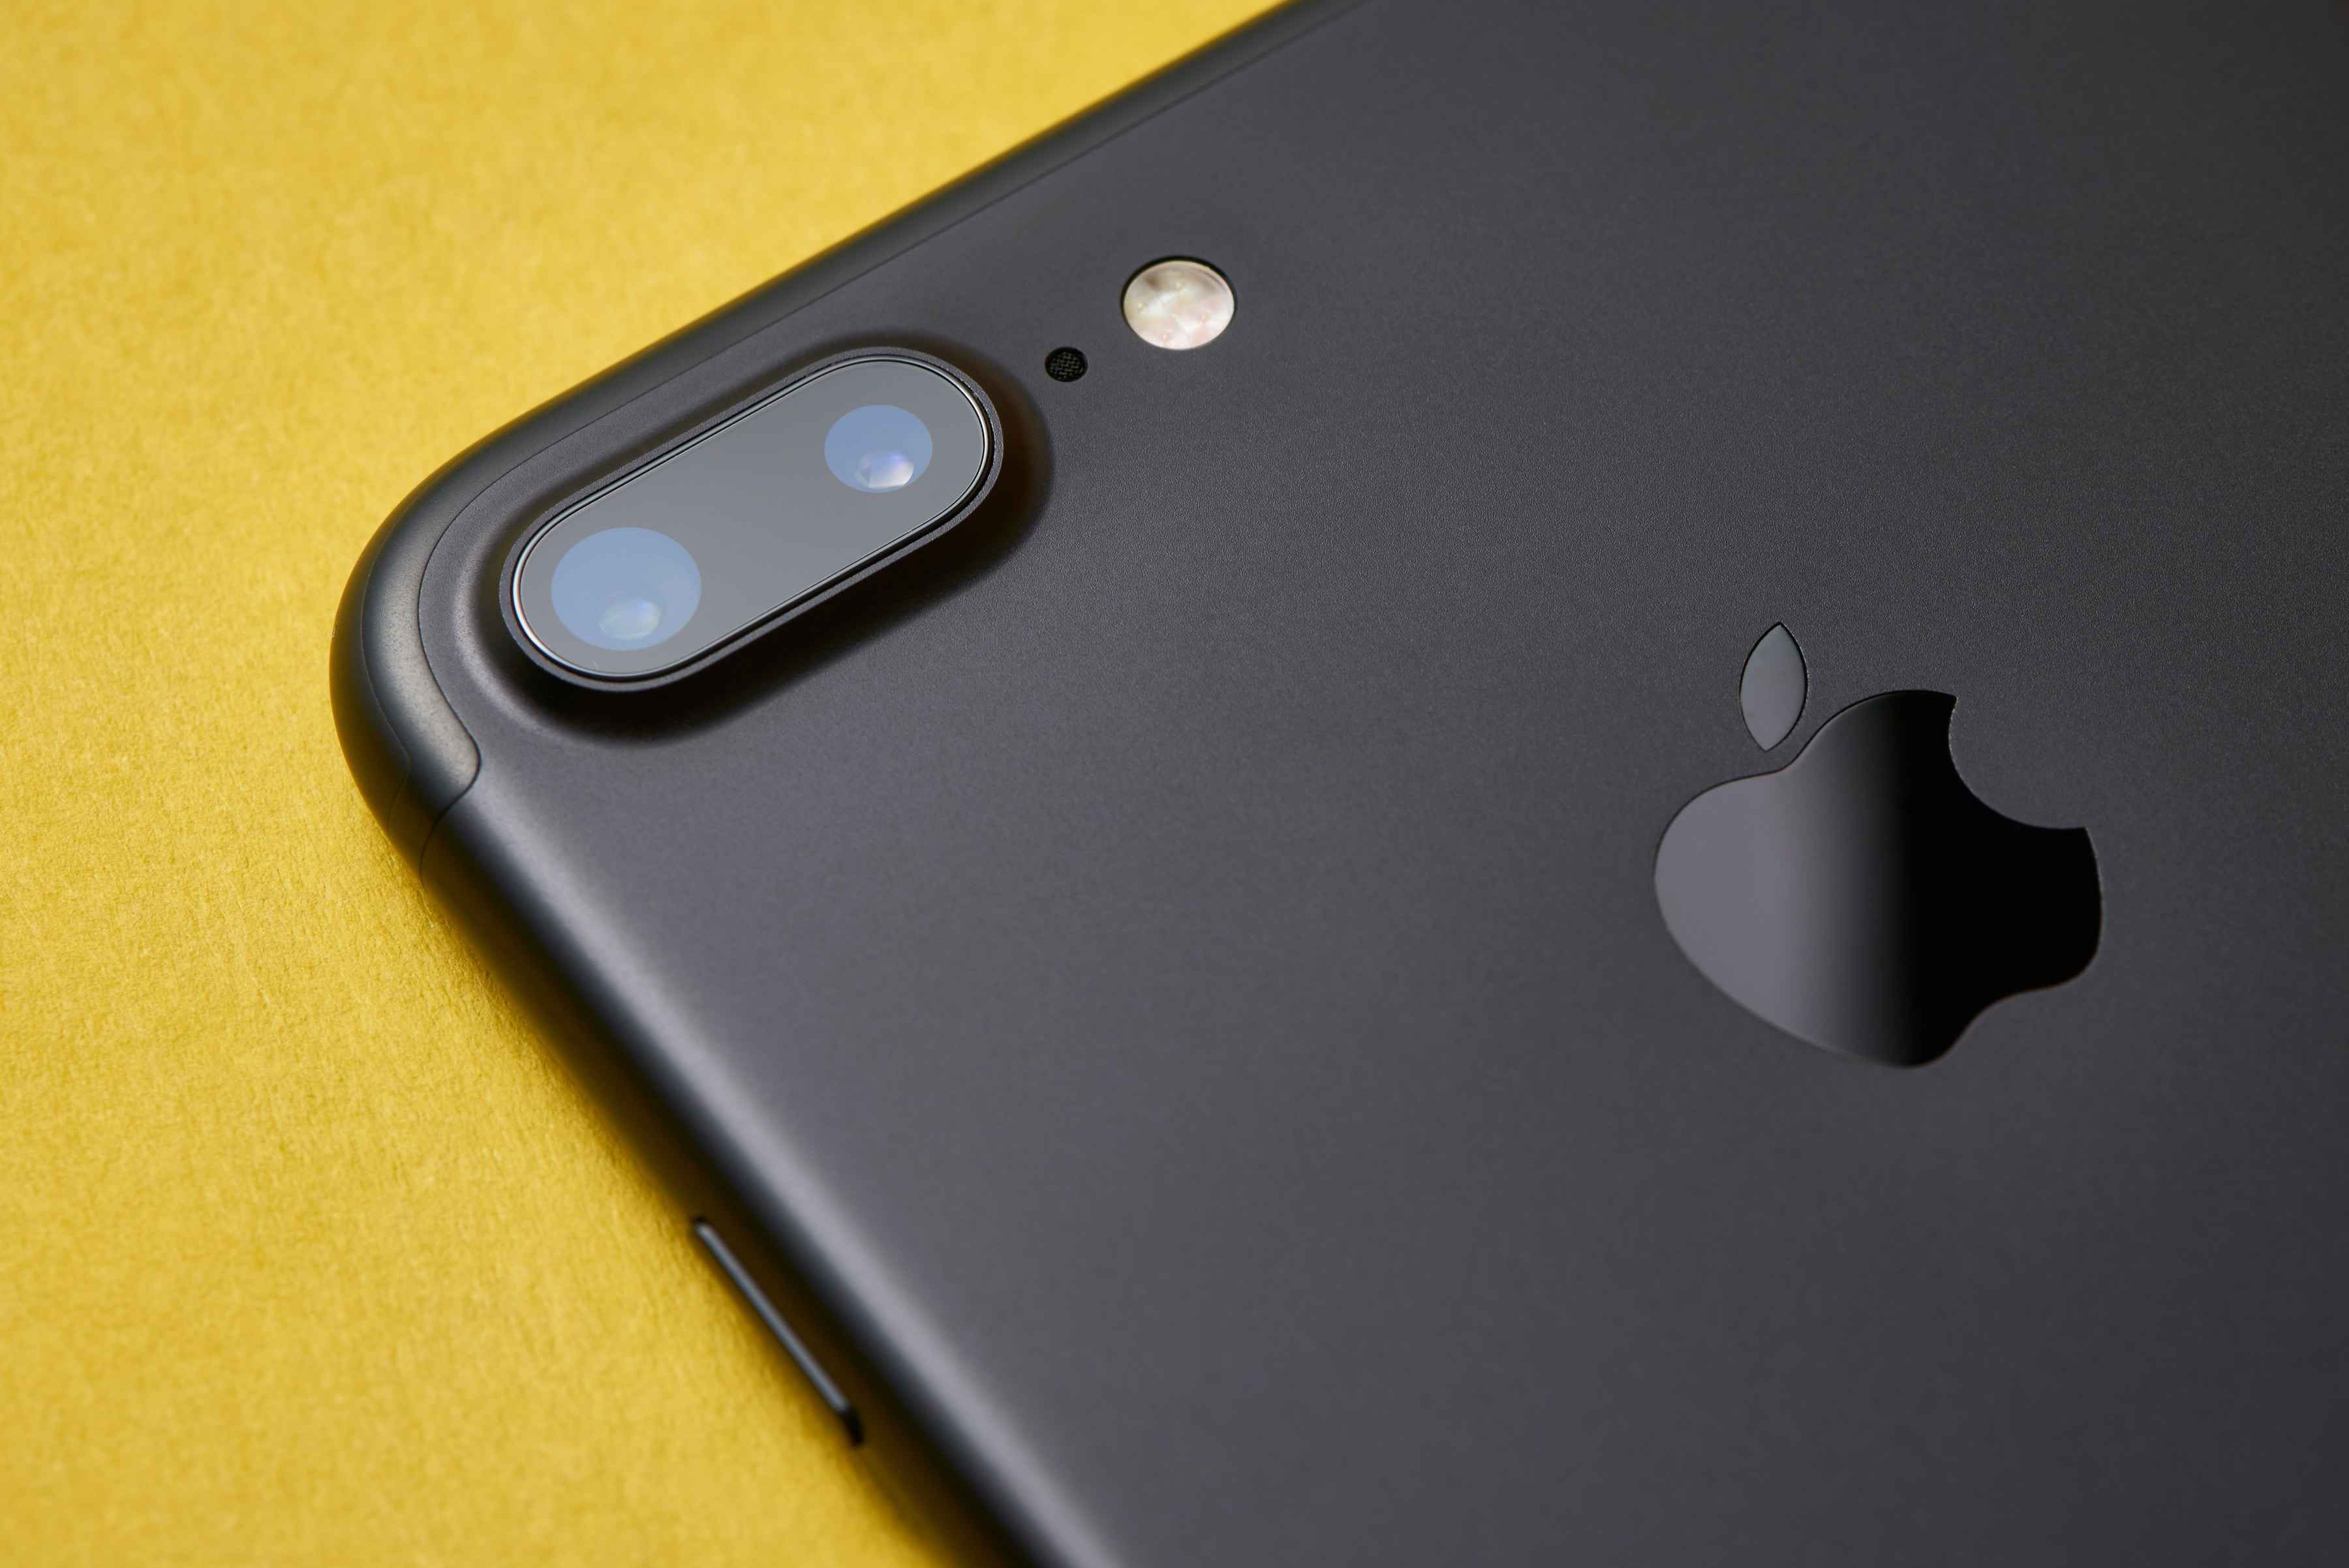 Refurbished vs New iPhone: Understanding the Key Differences